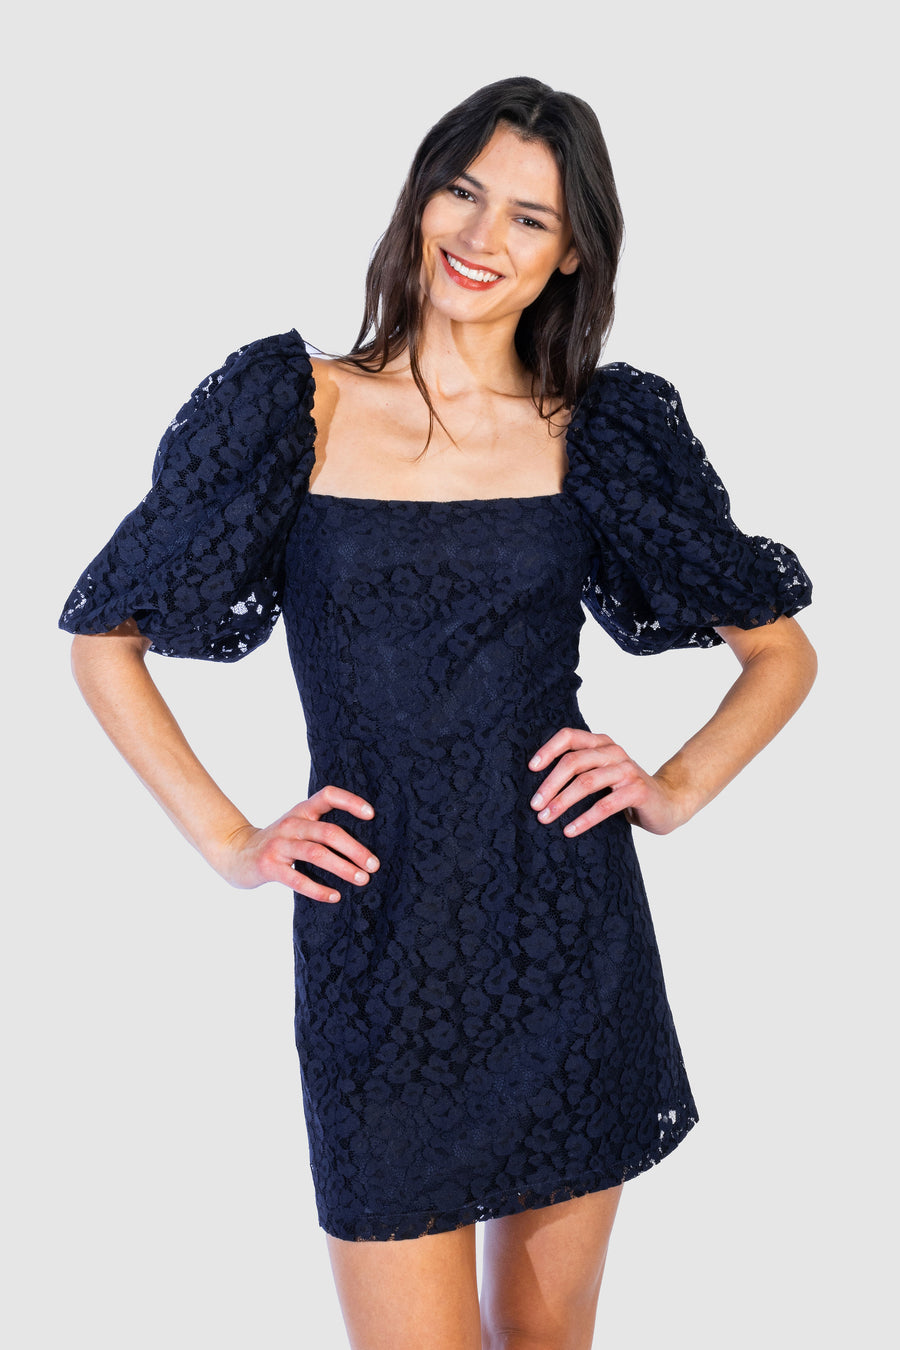 Chloe Dress Midnight Lace *Limited*Edition*